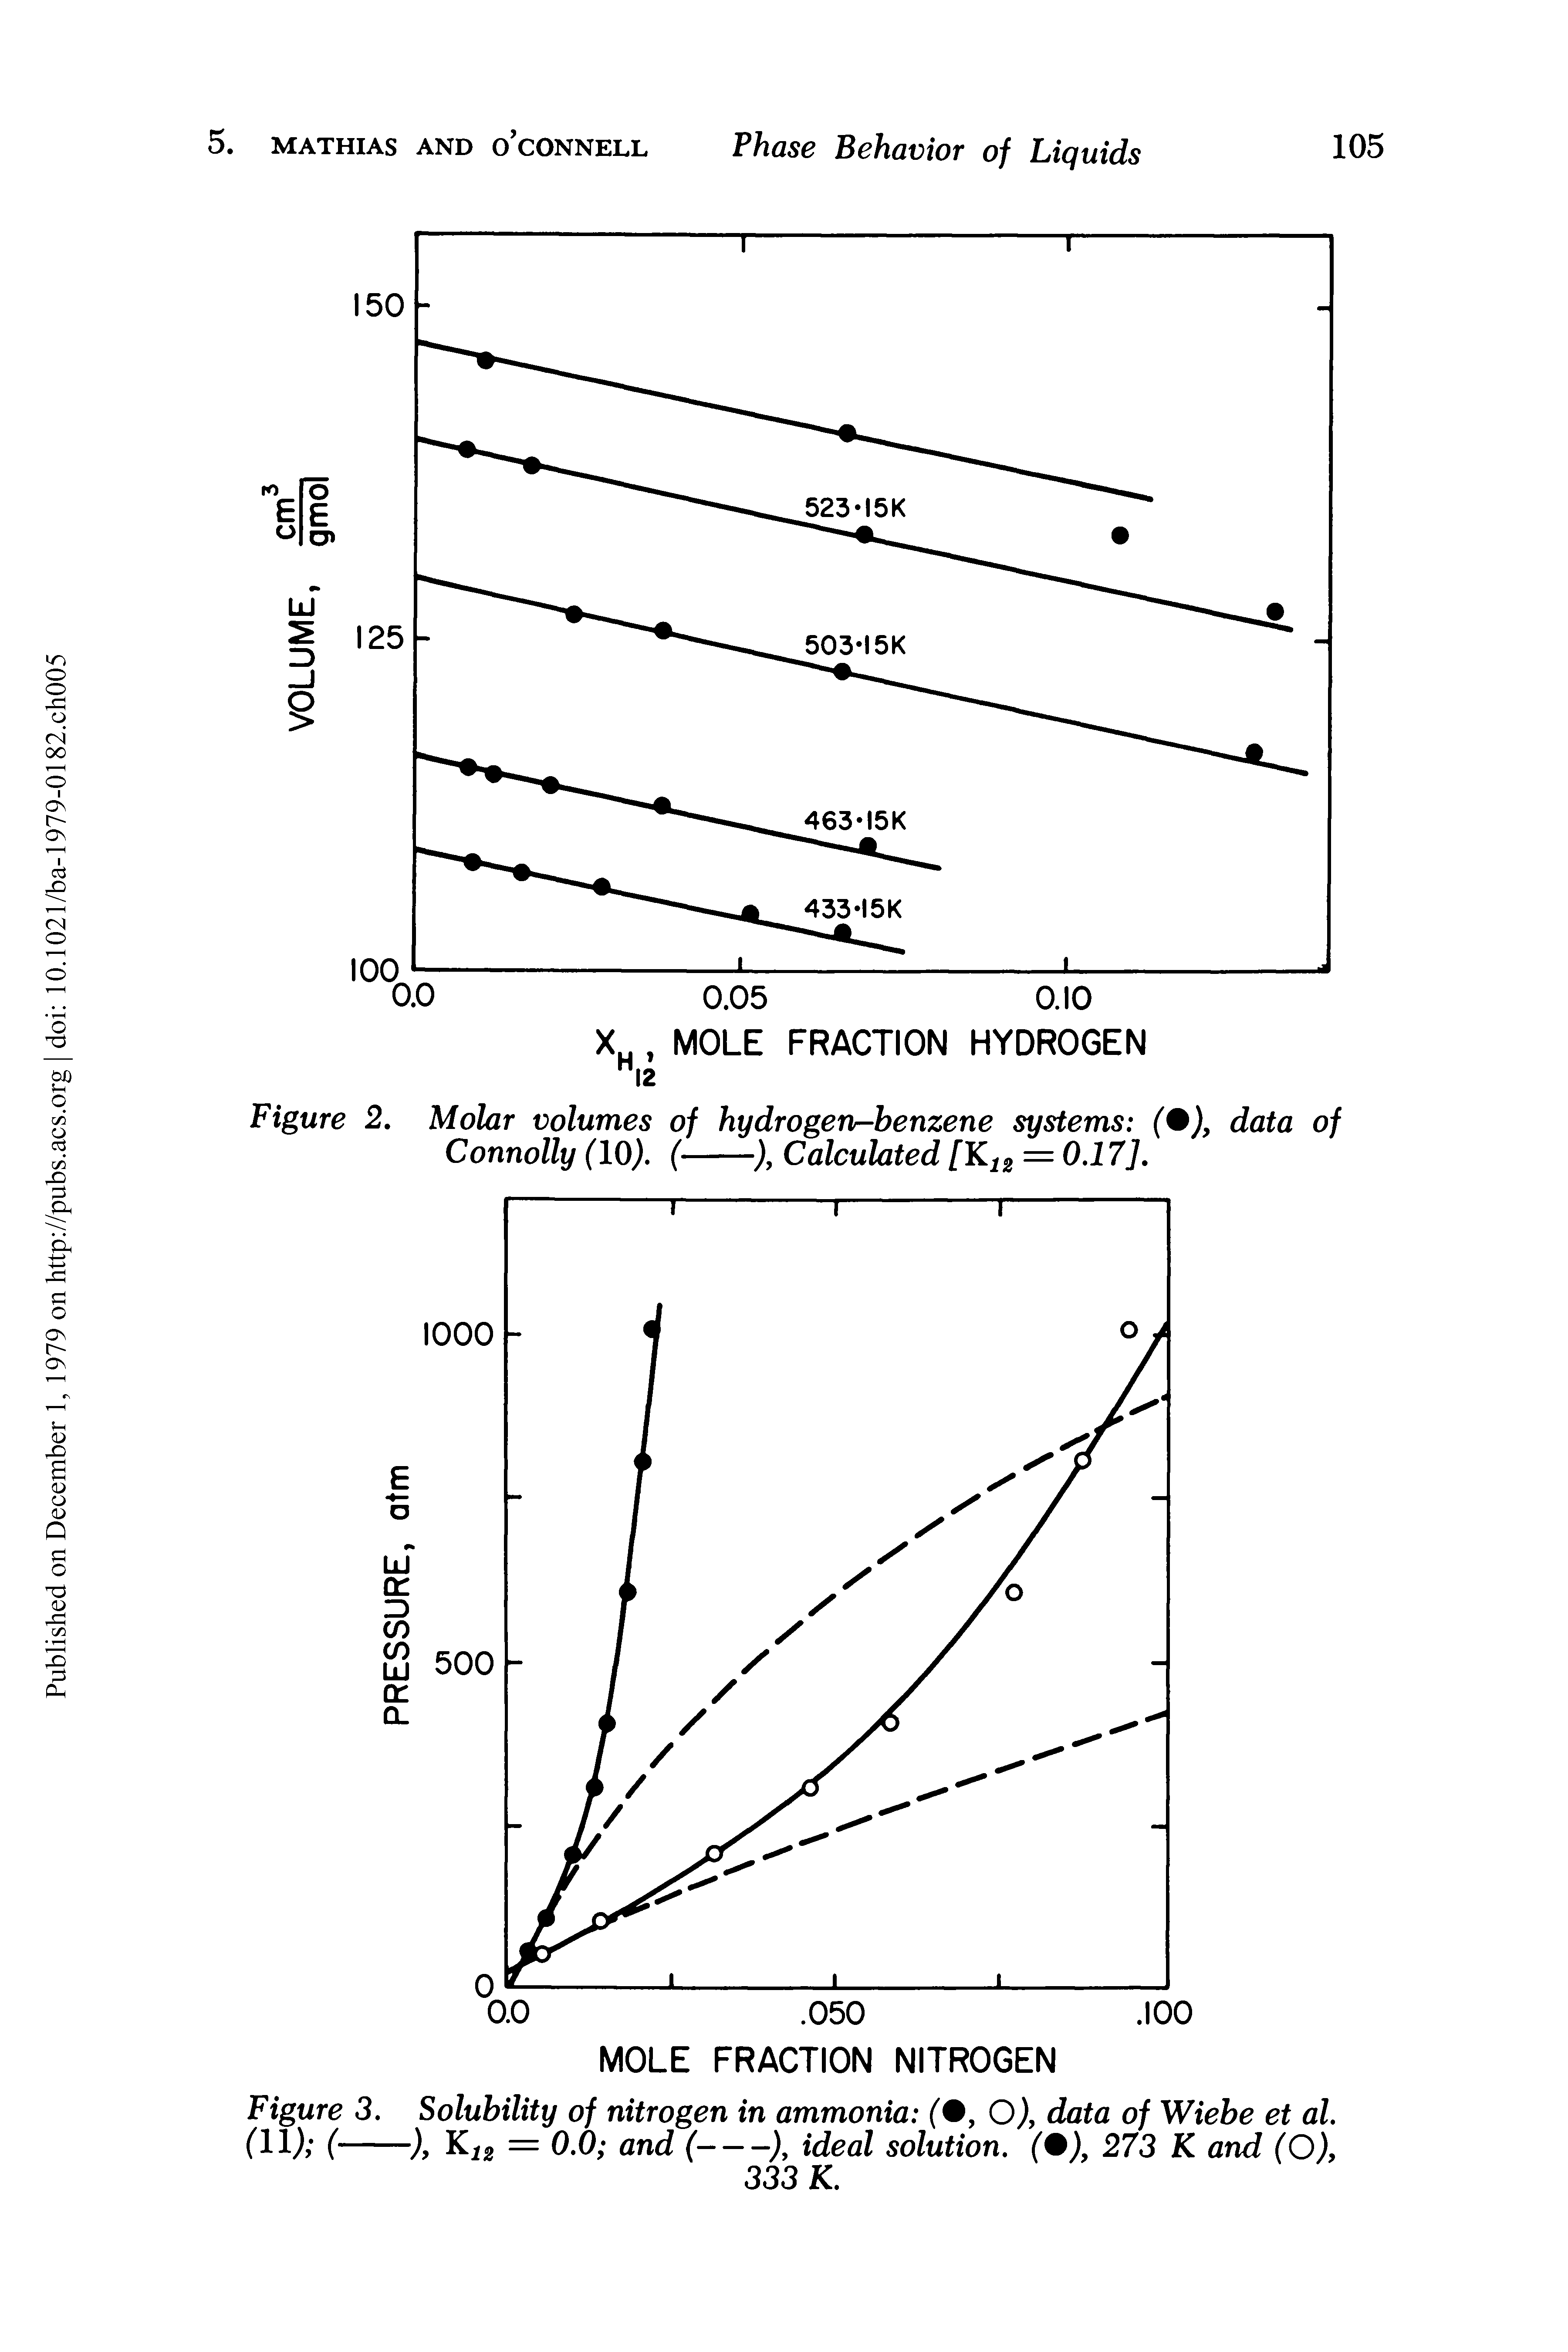 Figure 2. Molar volumes of hydrogeur-benzene systems ( ), data of Connolly (10). (----------------), Calculated [K12 = 0.17].